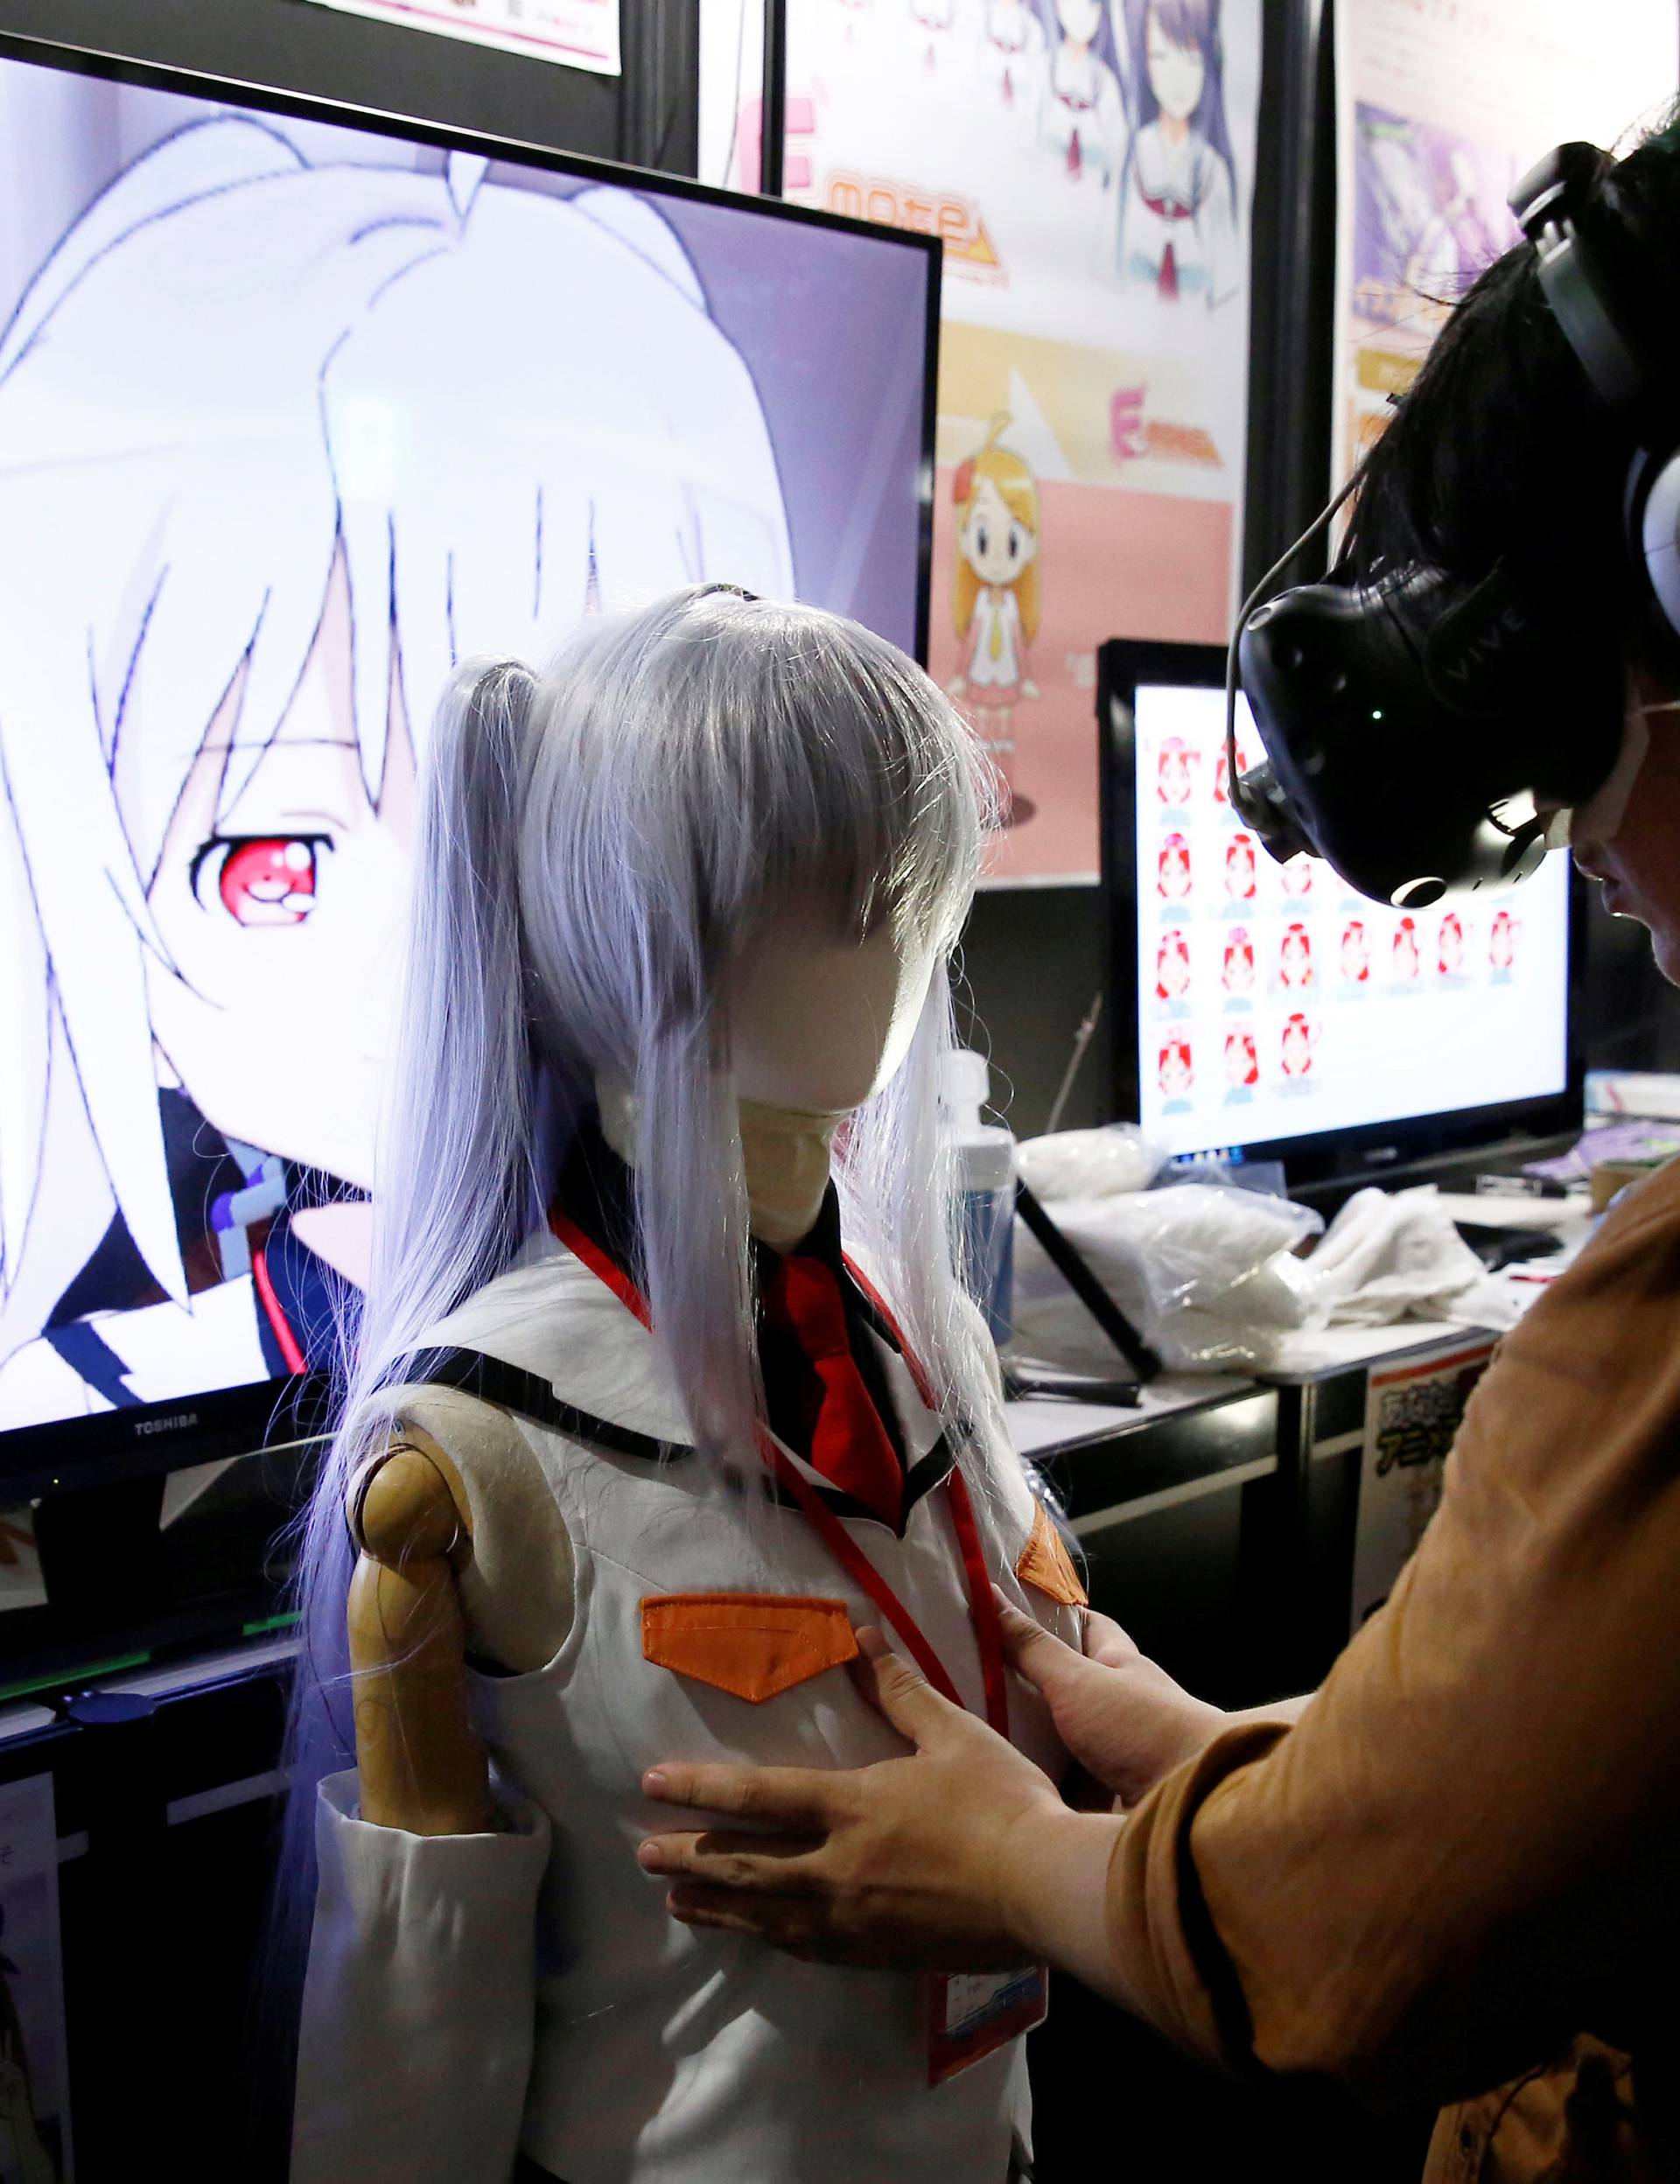 A man touches a mannequin as he tries out a M2 Co.Ltd's "E-mote" system as the monitor shows the image from the VR device at Tokyo Game Show 2016 in Chiba